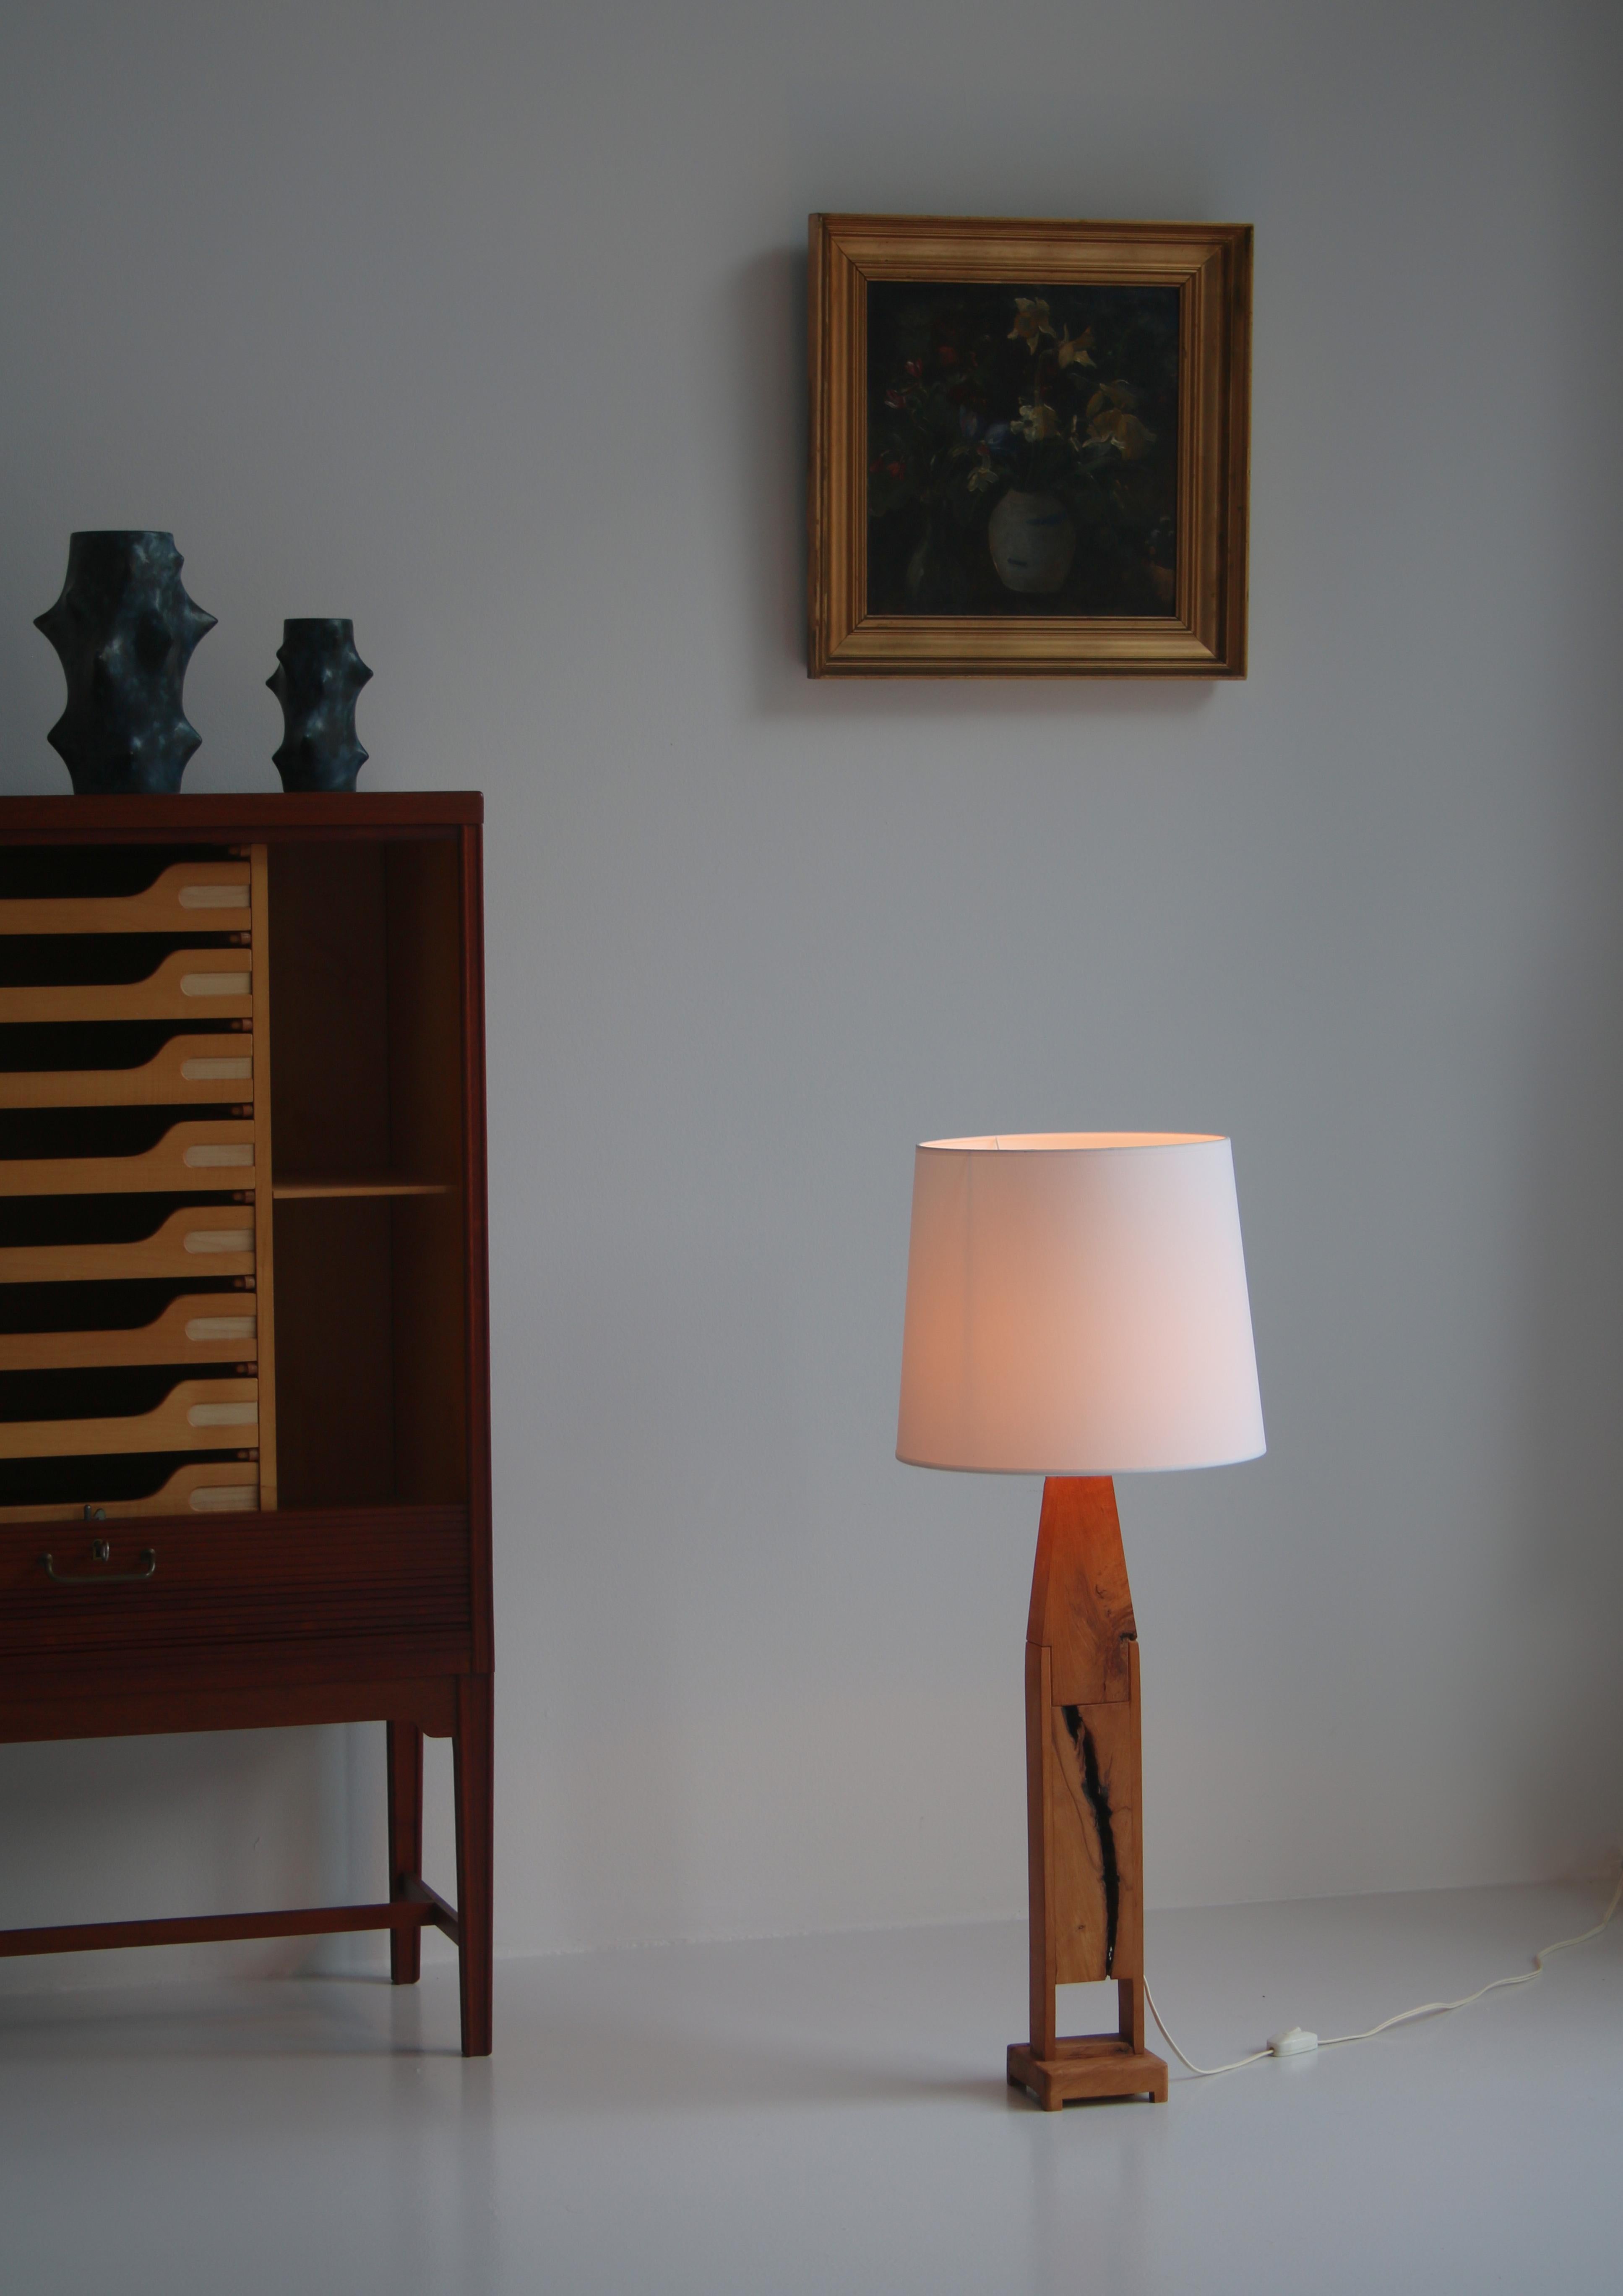 Large and stunning vintage pine wood floor lamp. Made in Denmark in the 1970s from a single piece of wood. The grain and structure is amazing and the design typical for Scandinavian Modern furniture of the period. Great condition.